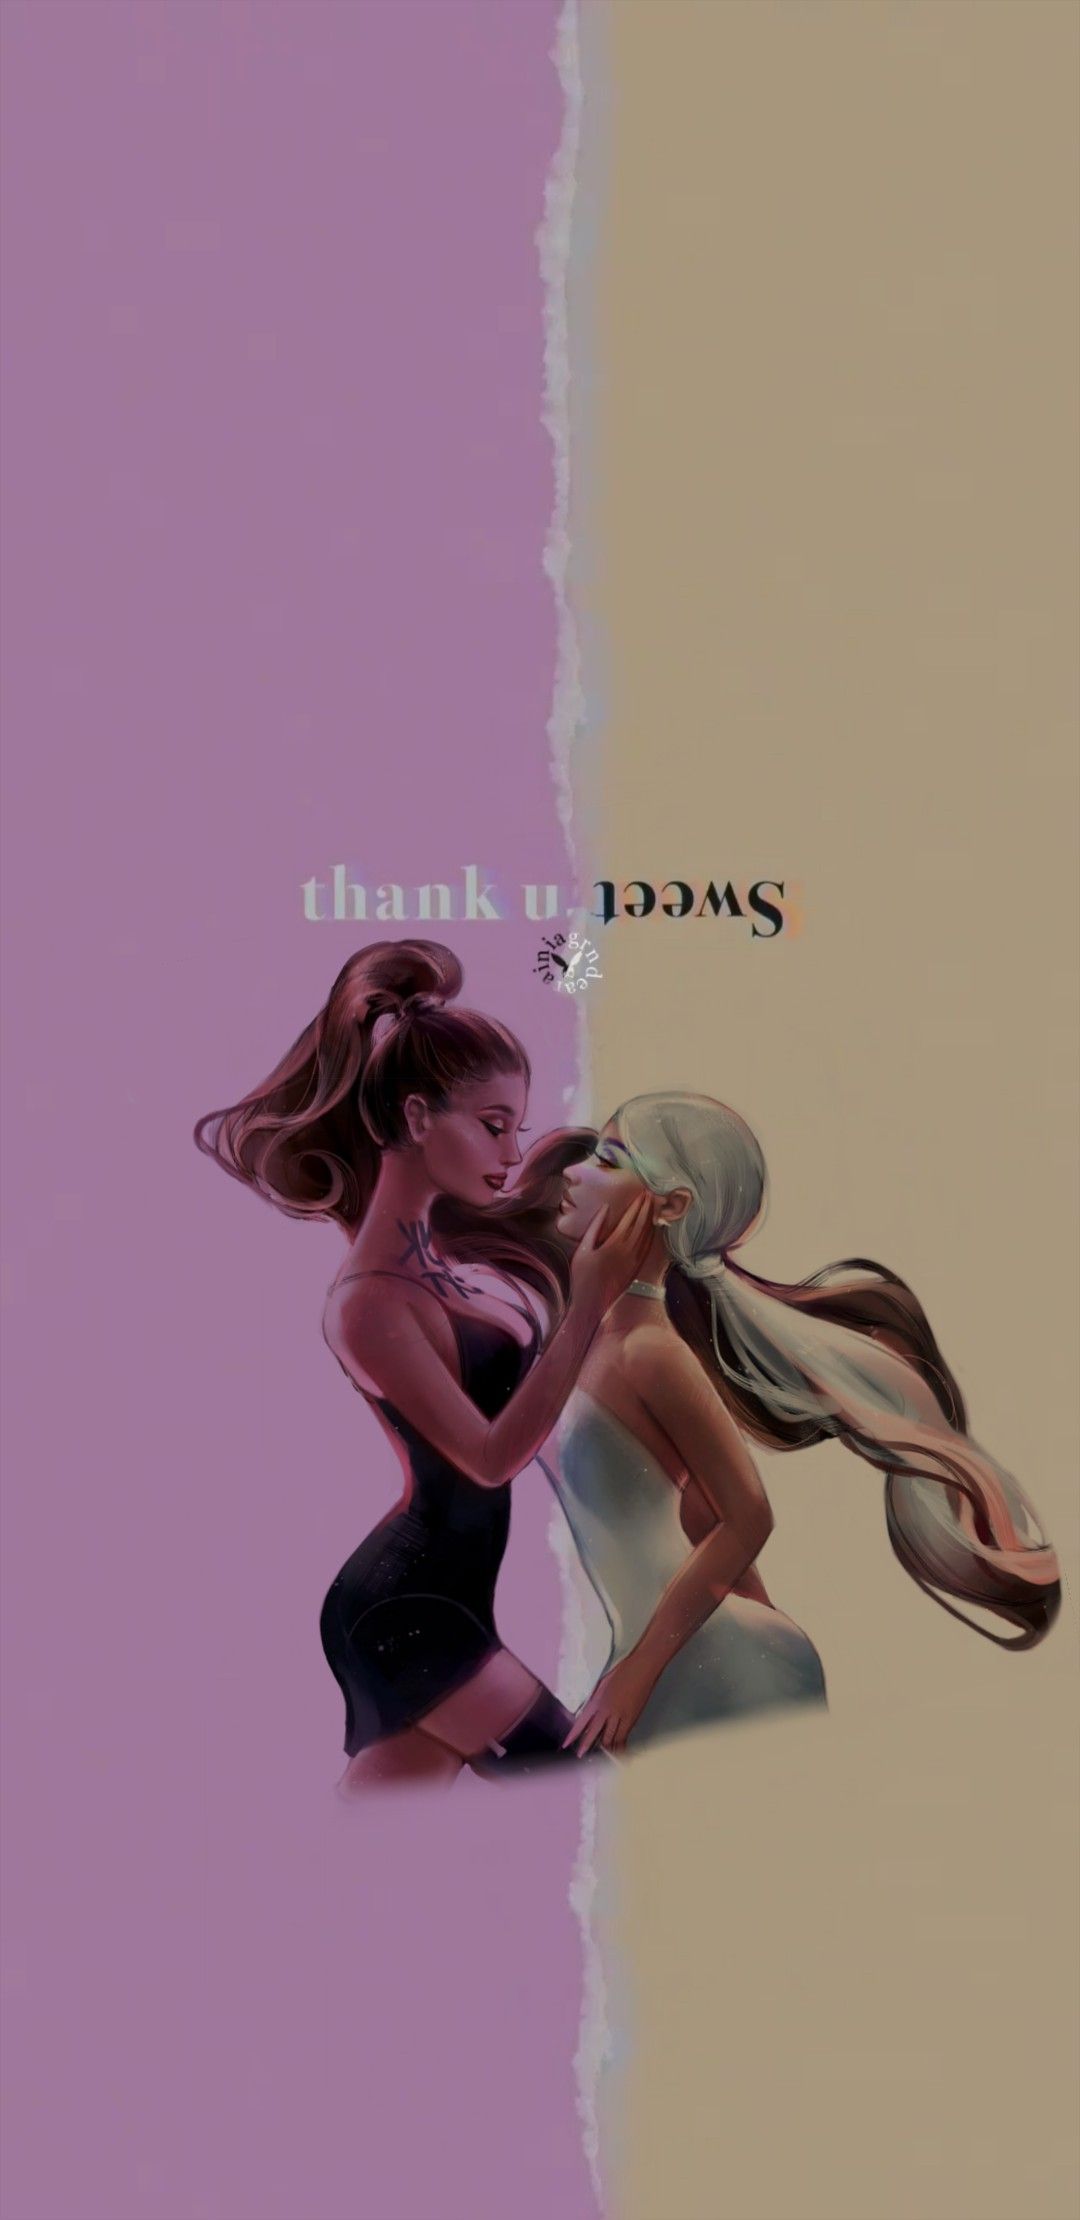 Free Download Ariana Grande Wallpaper Art Made By Dyllustrates On Ig Ariana 1080x22 For Your Desktop Mobile Tablet Explore 33 Ariana Grande Album Wallpapers Ariana Grande Xxxtentacion Wallpapers Ariana